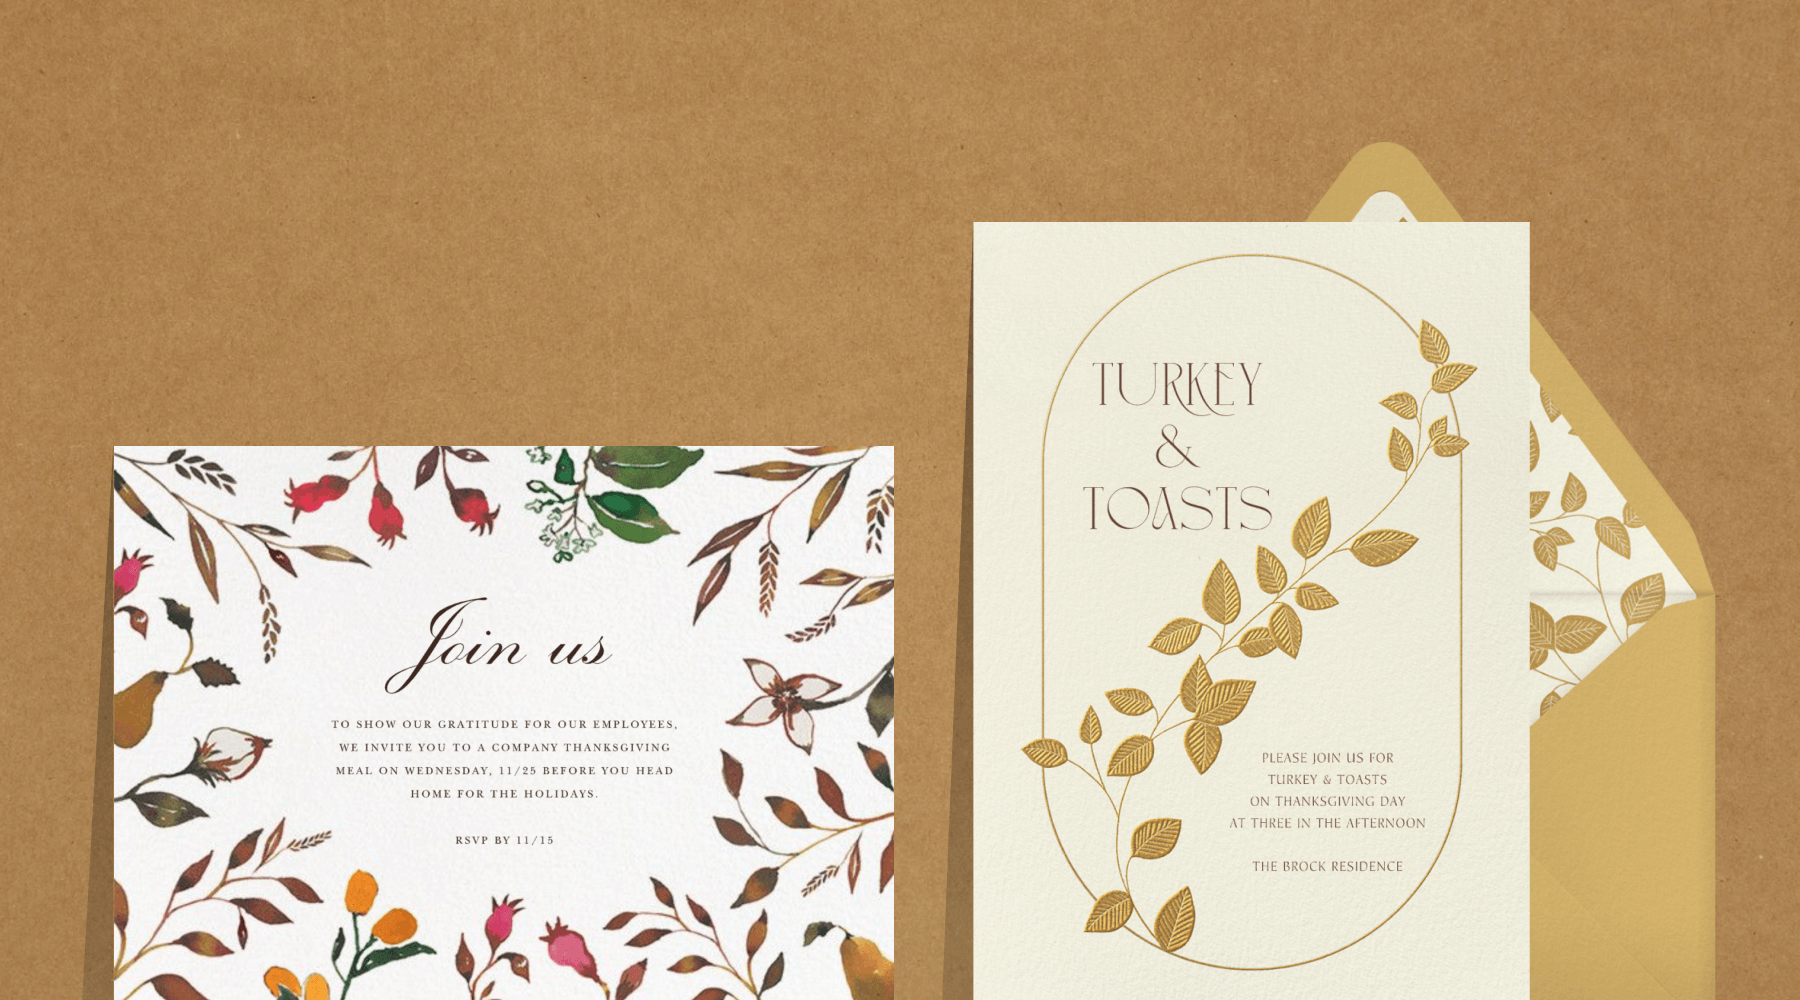 Two invitations. One reads “Join us” in script with delicate autumnal flowers reaching in from the edges of the Card. On the right, a Card reads “turkey & toasts with a gold-lined oval border and gold leaves scrolling across the center.